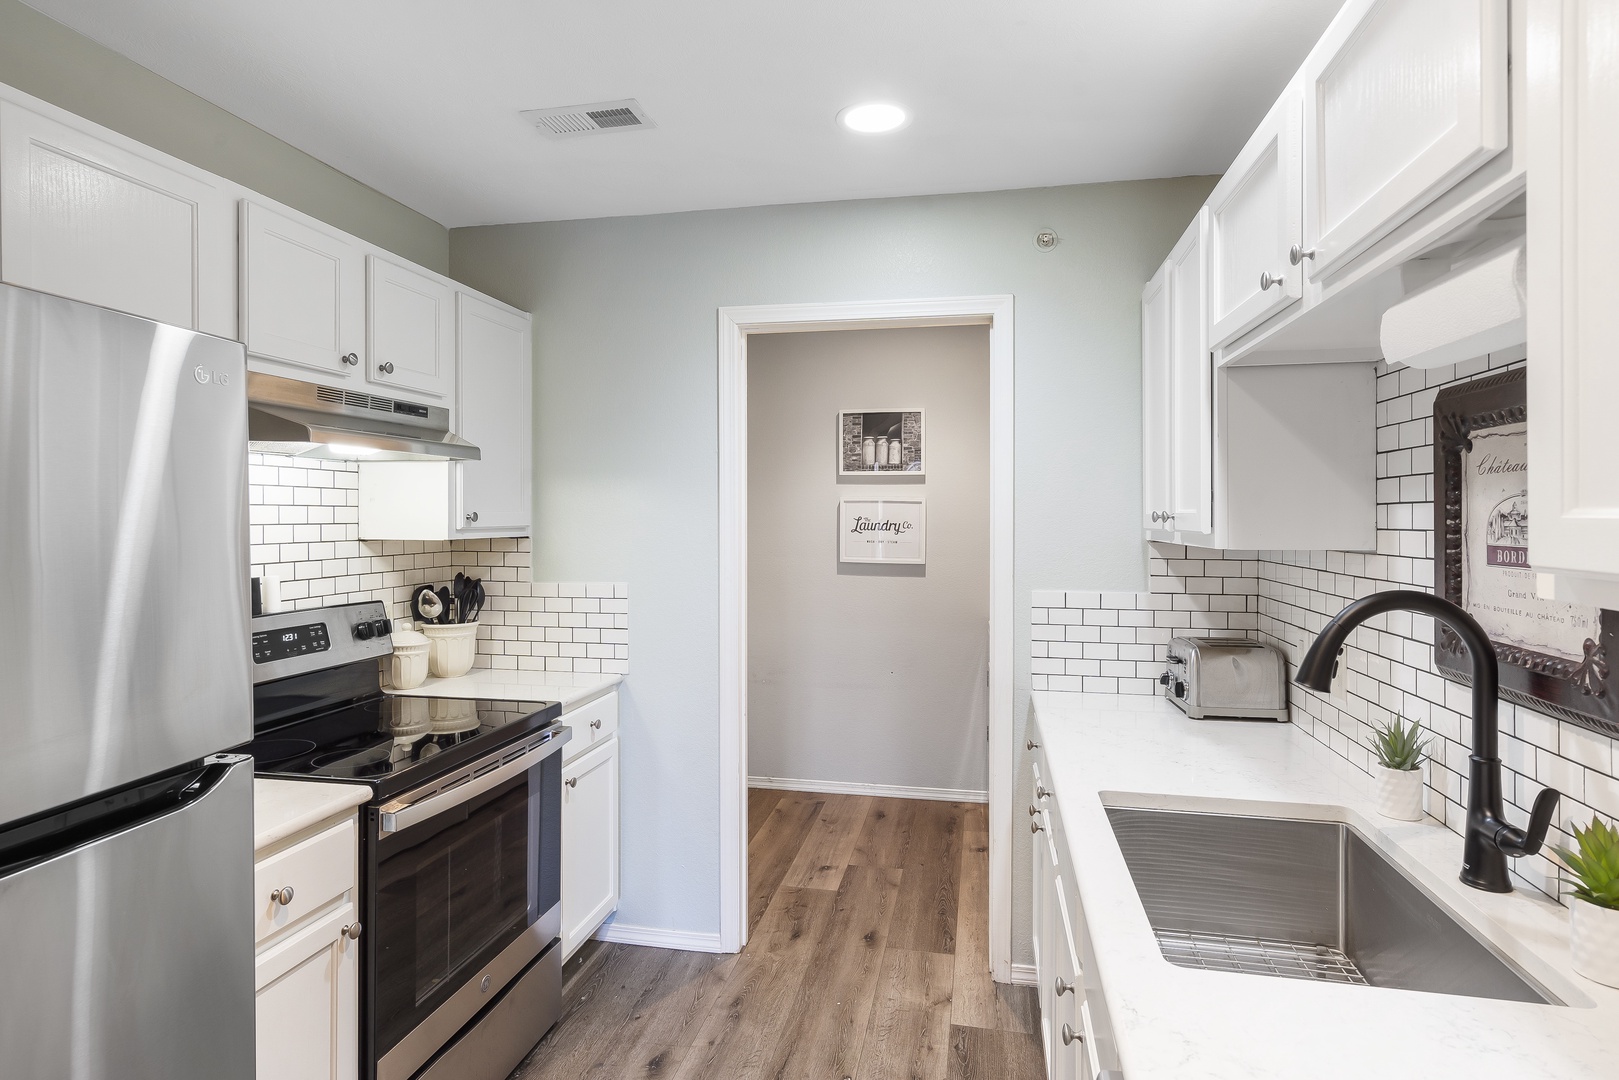 The airy kitchen offers ample space & all the comforts of home